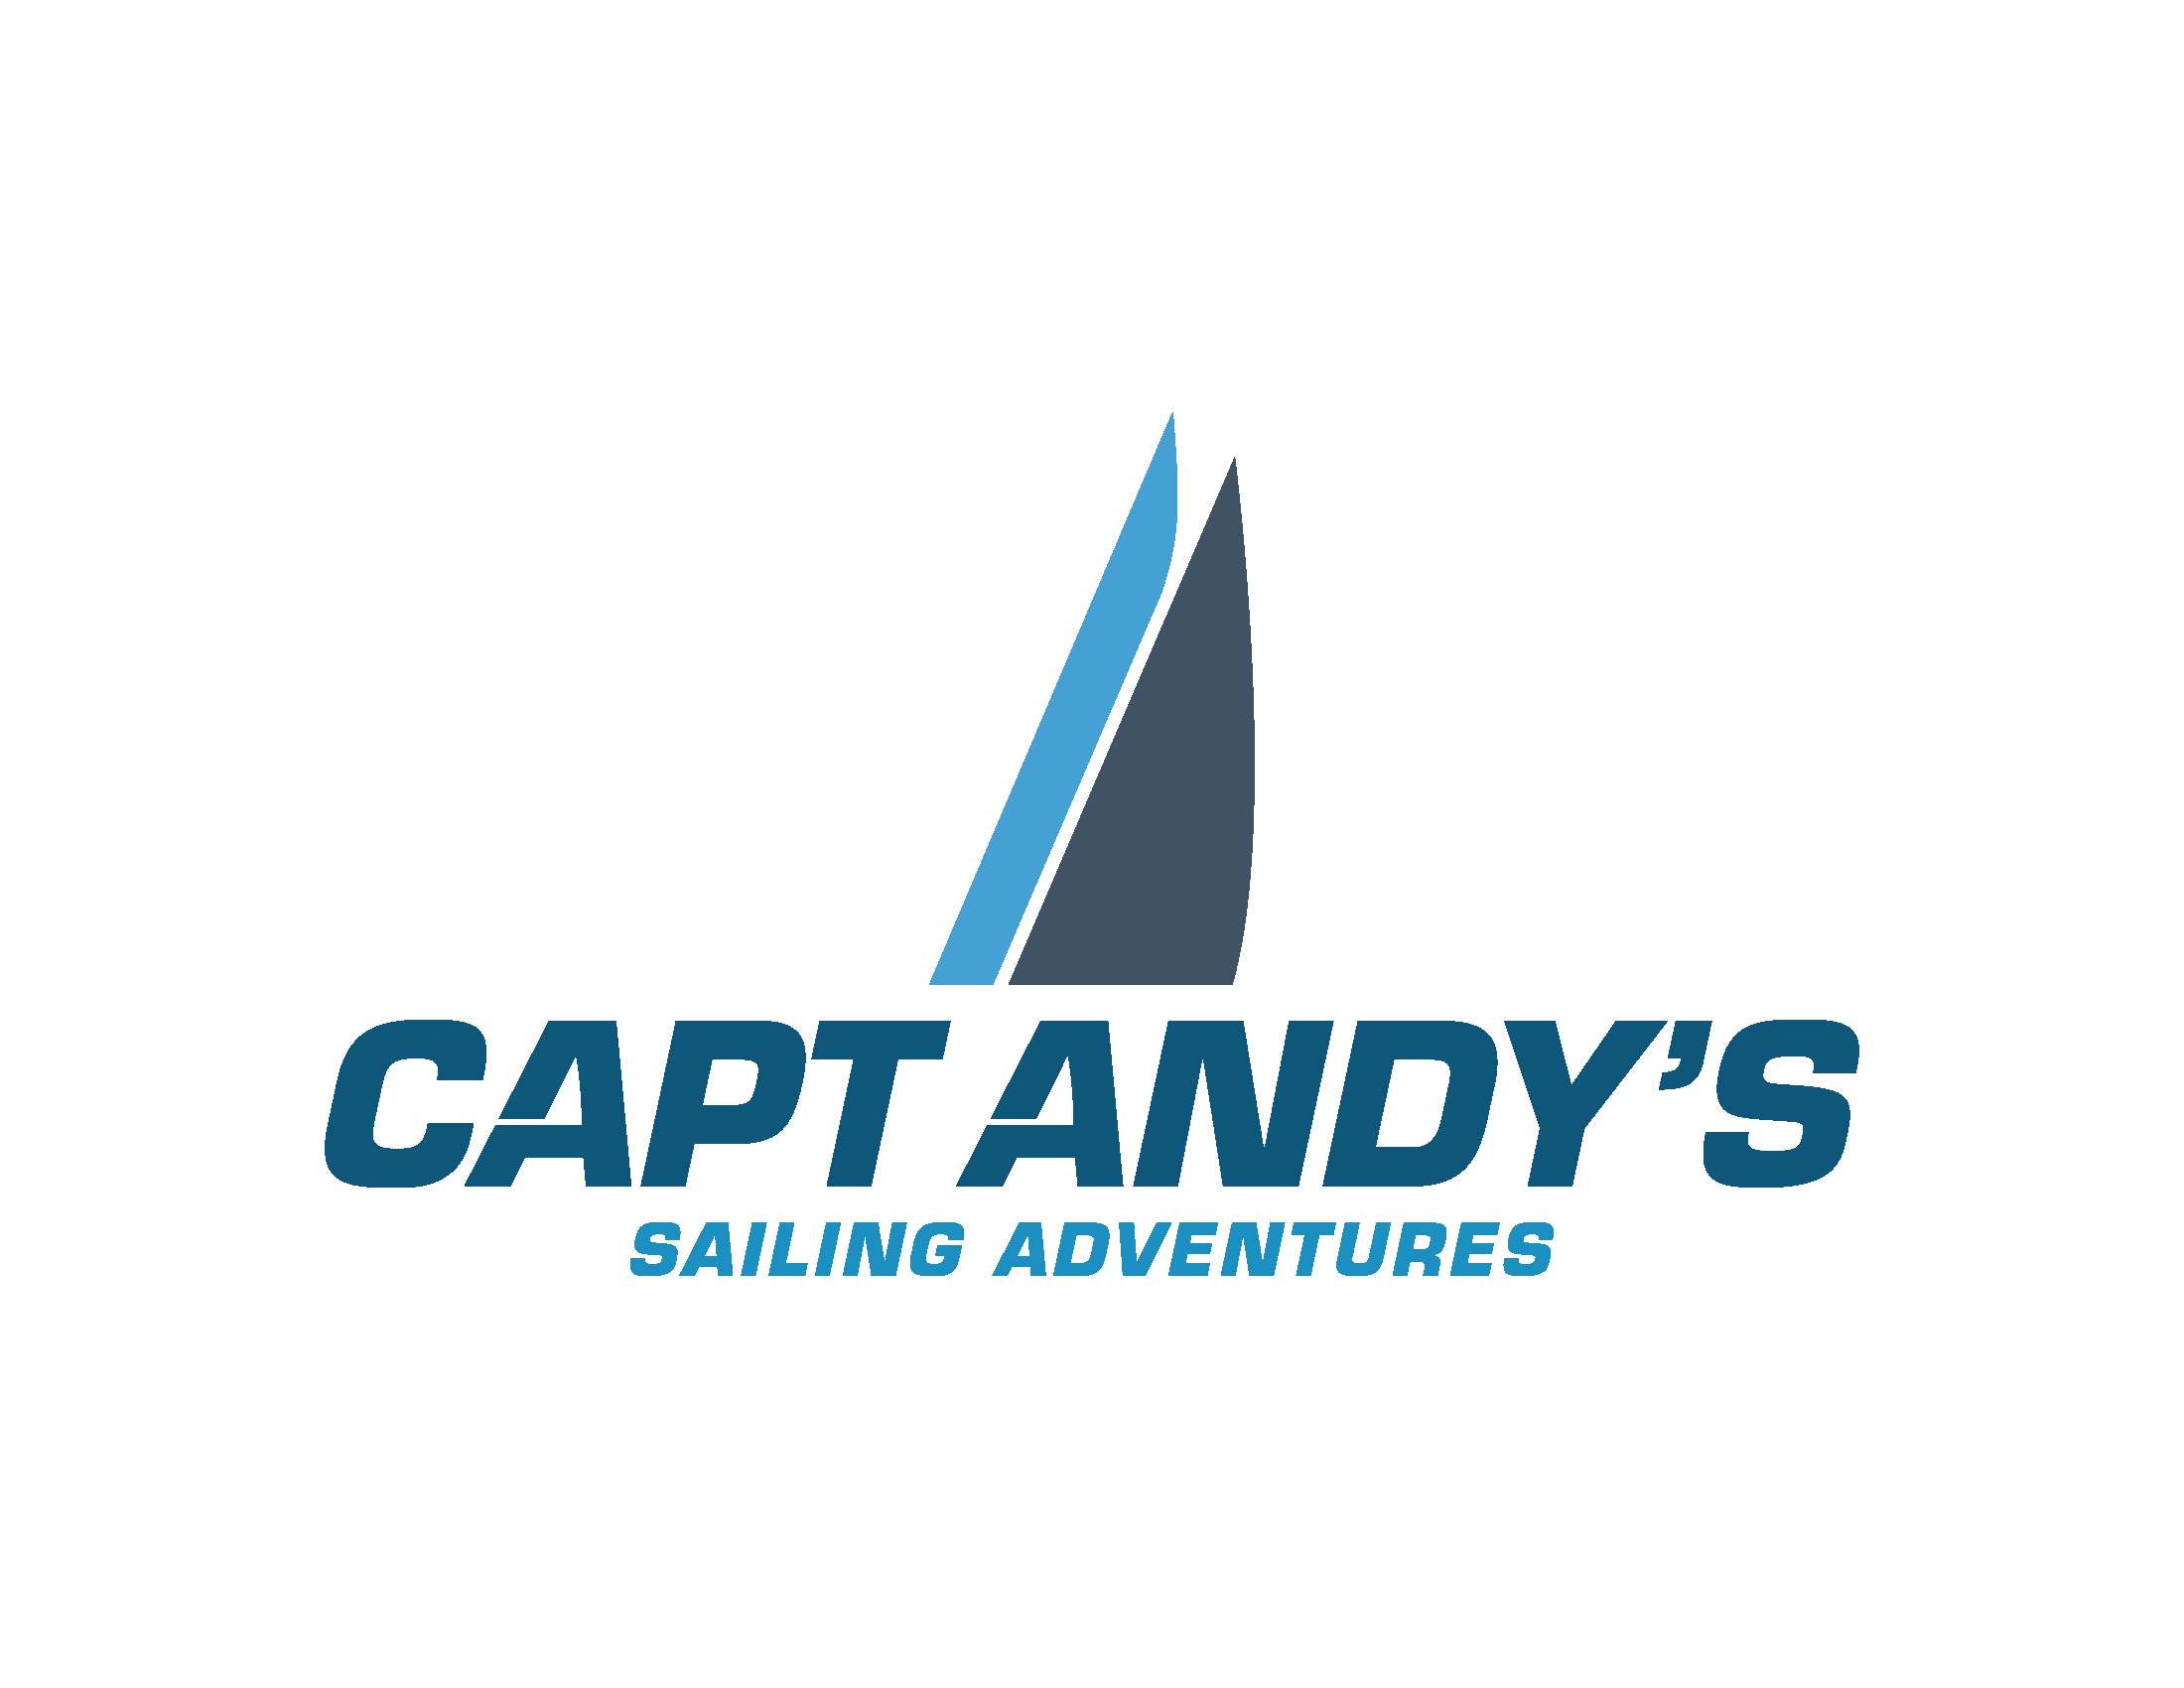 Captain Andy's